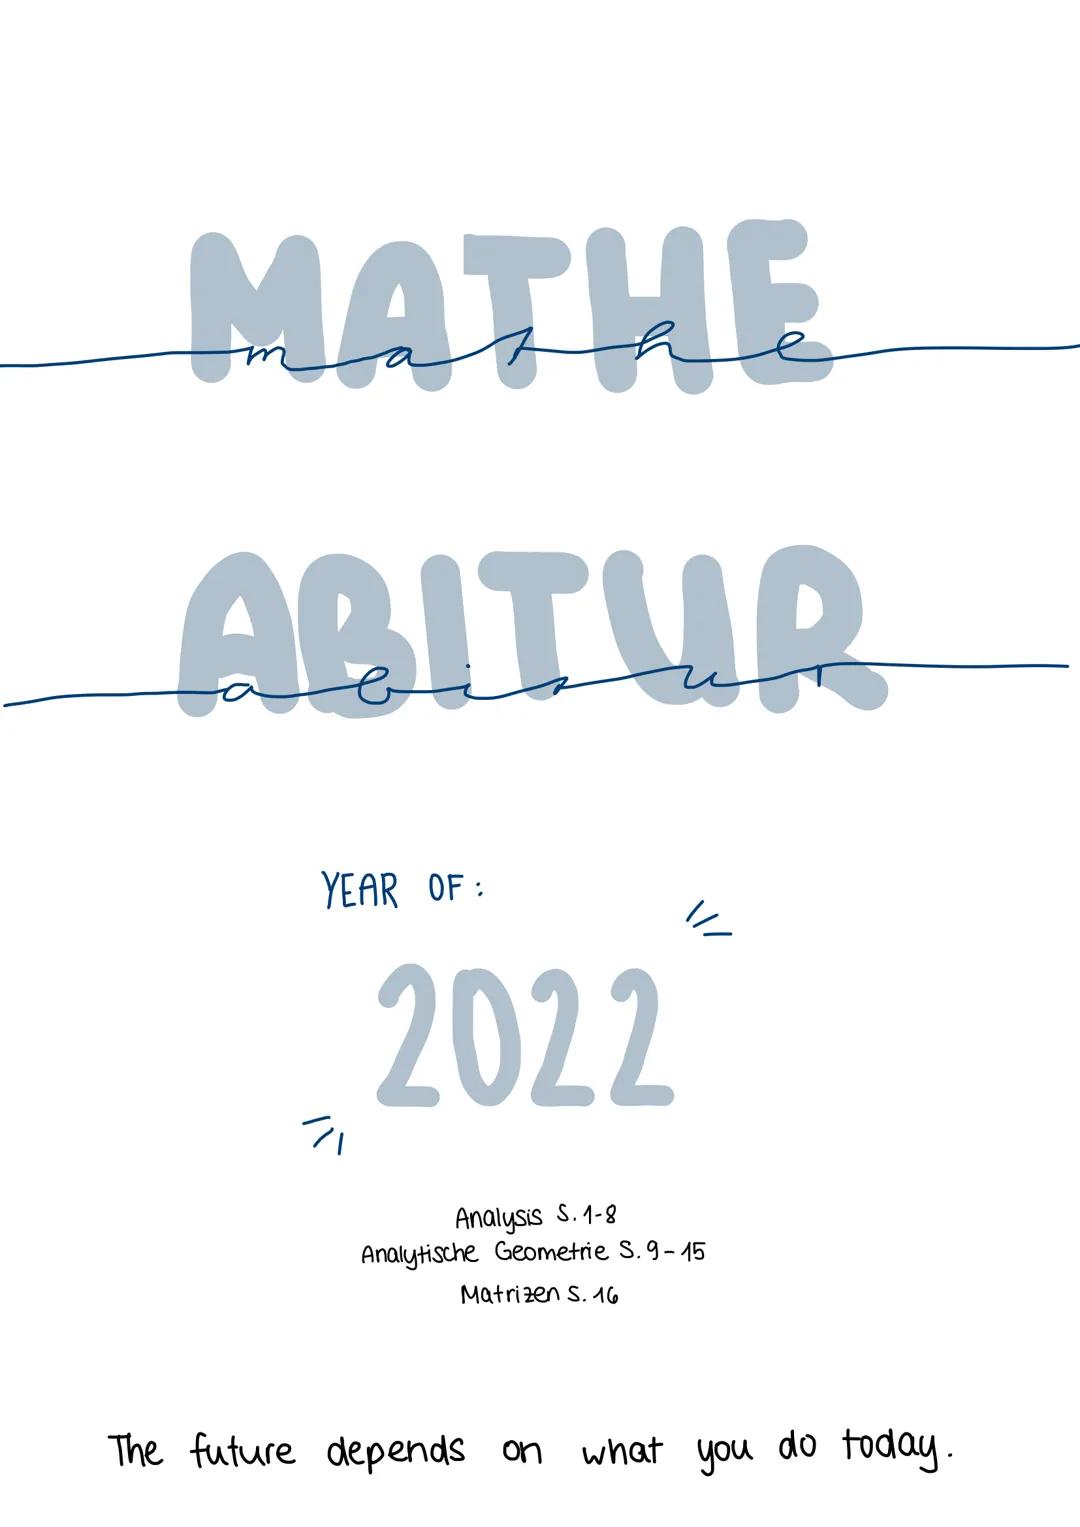 MATHE
ABITUR
YEAR OF:
71
2022
\//
Analysis S. 1-8
Analytische Geometrie S. 9-15
Matrizen S. 16
The future depends on what you do today. ANAL